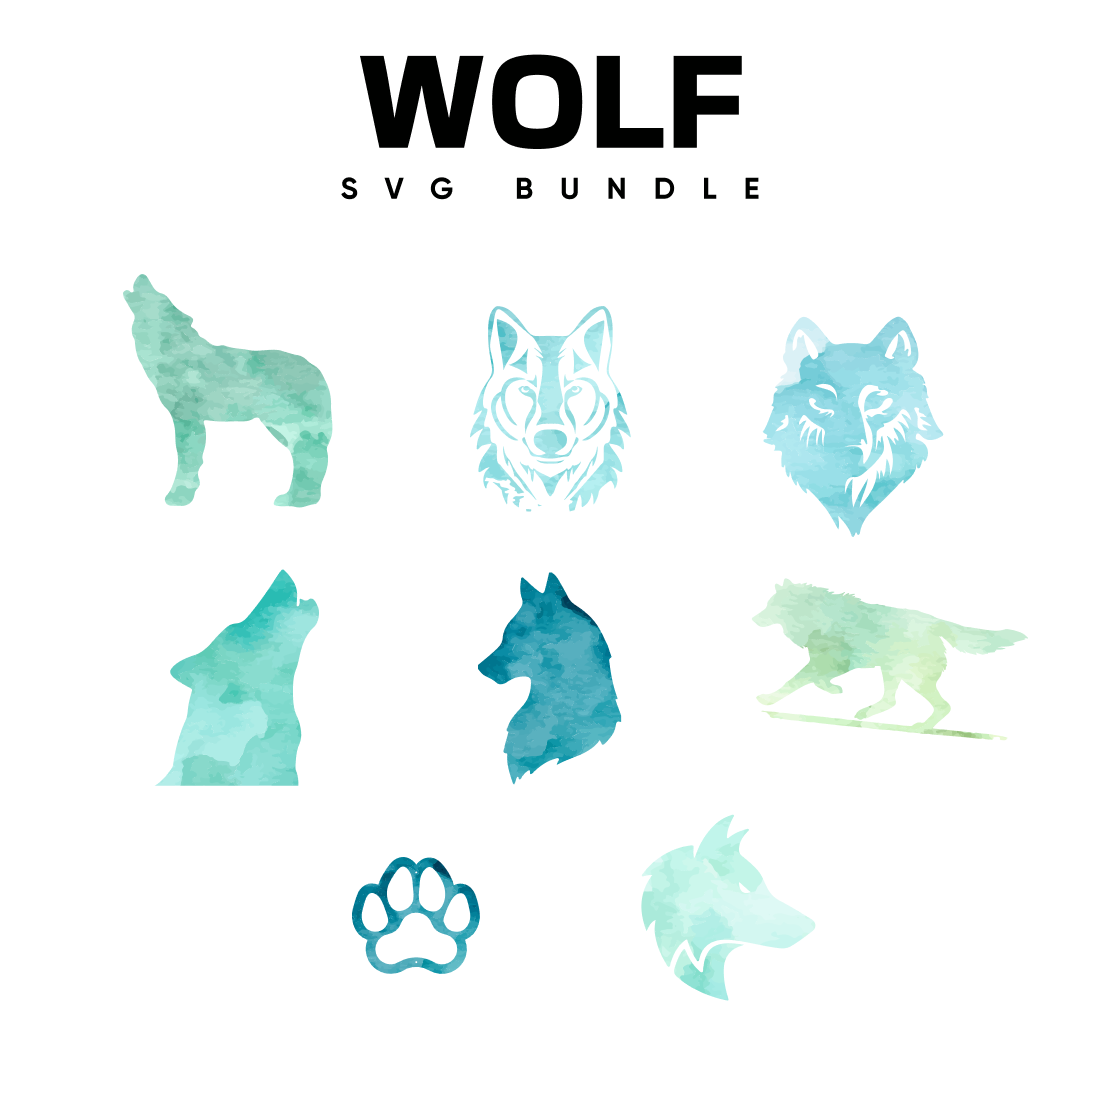 The wolf svg bundle includes a wolf.